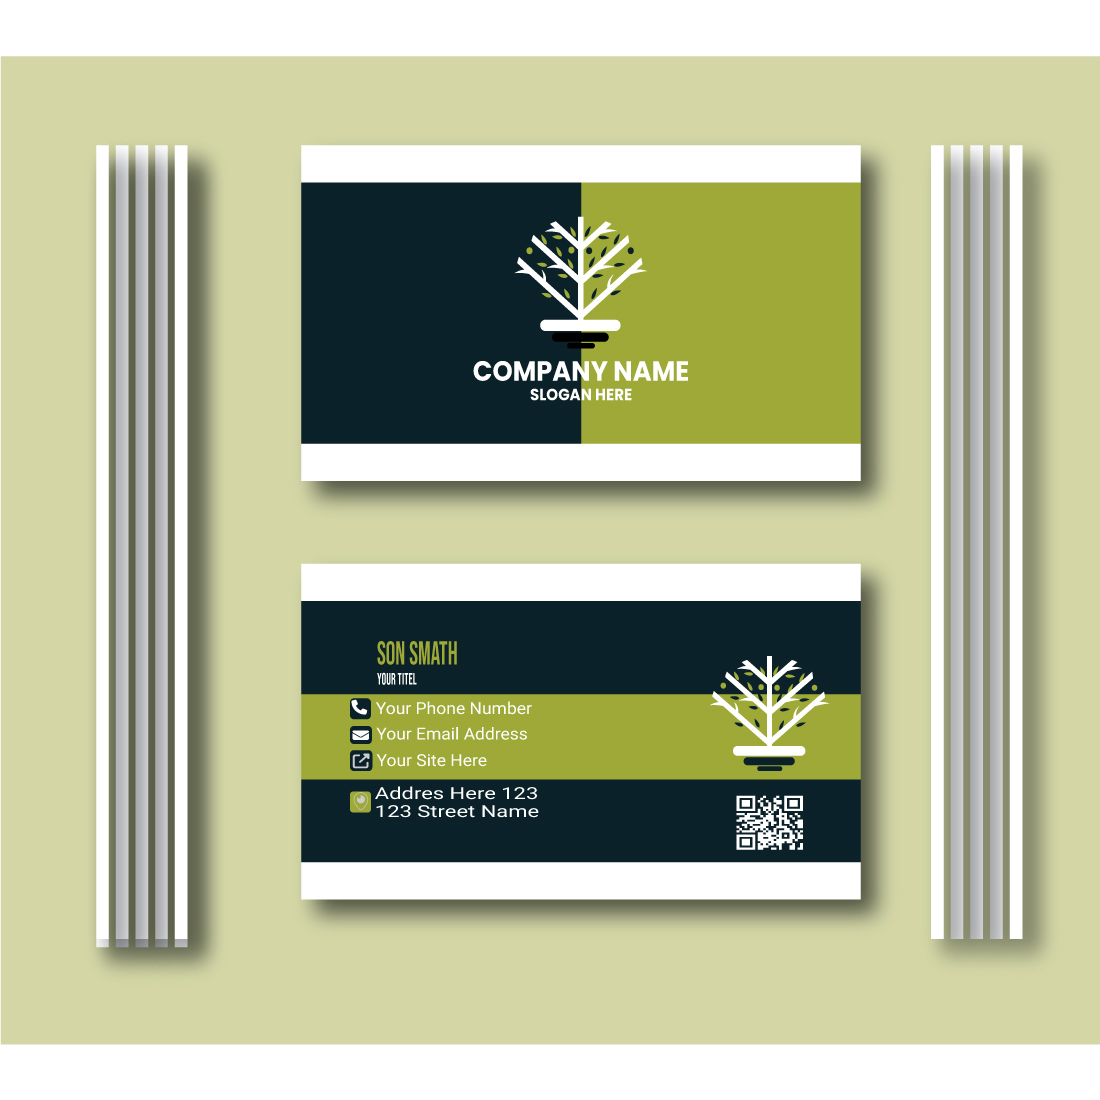 Creative Business Card Design preview image.